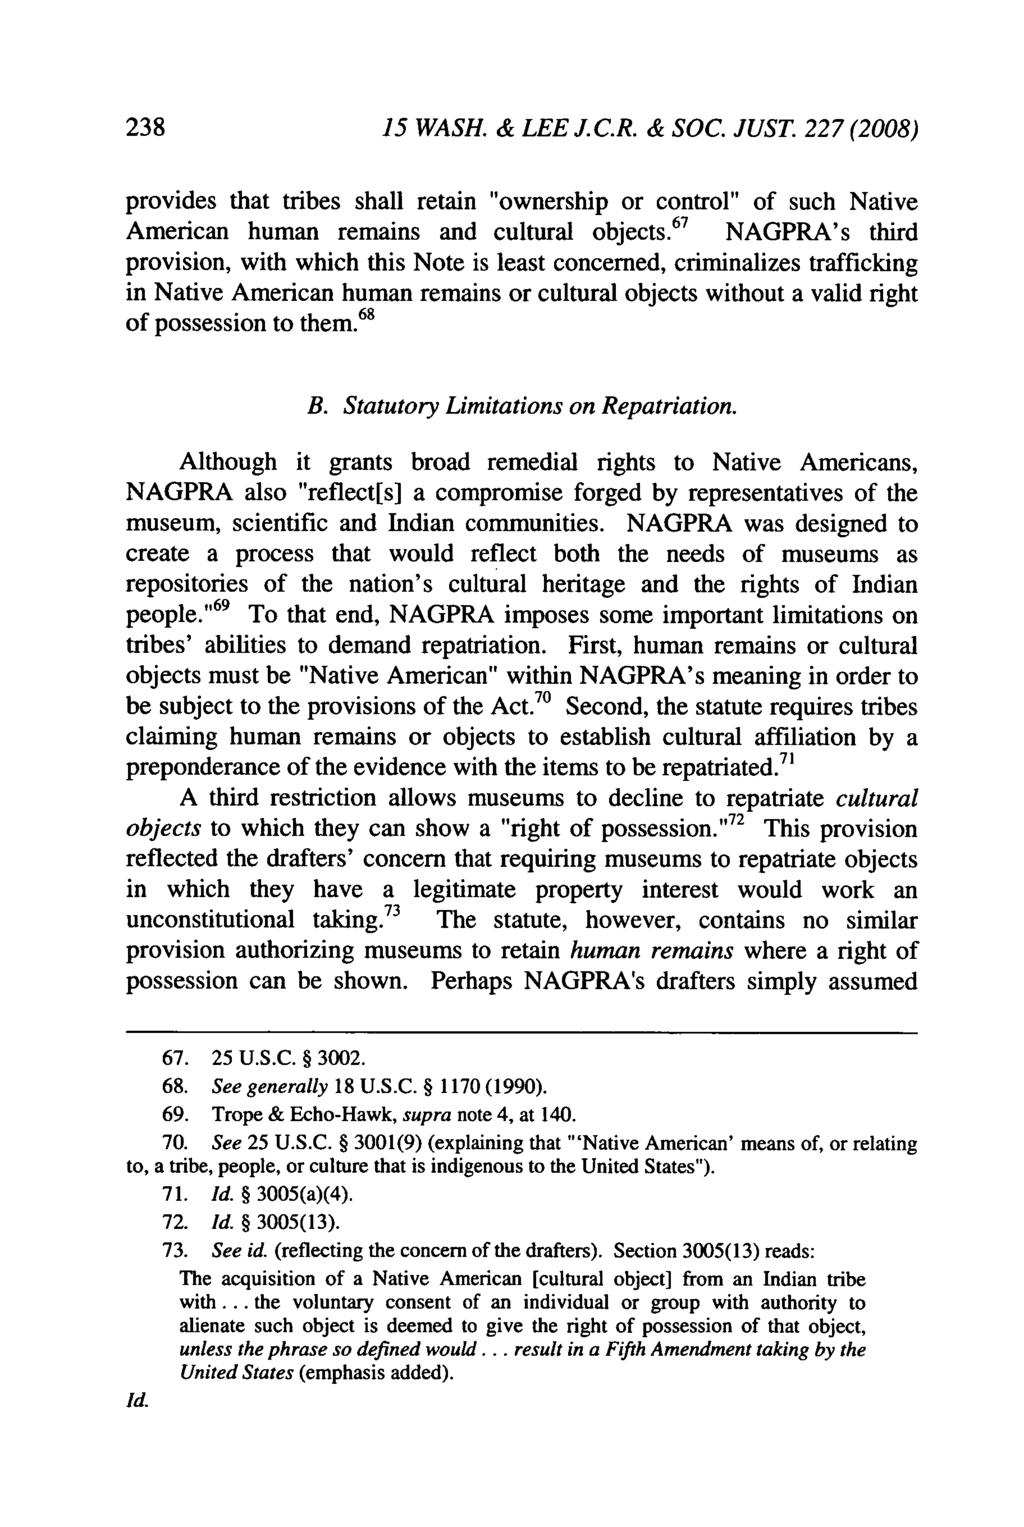 15 WASH. & LEE J.C.R. & SOC. JUST. 227 (2008) provides that tribes shall retain "ownership or control" of such Native American human remains and cultural objects.